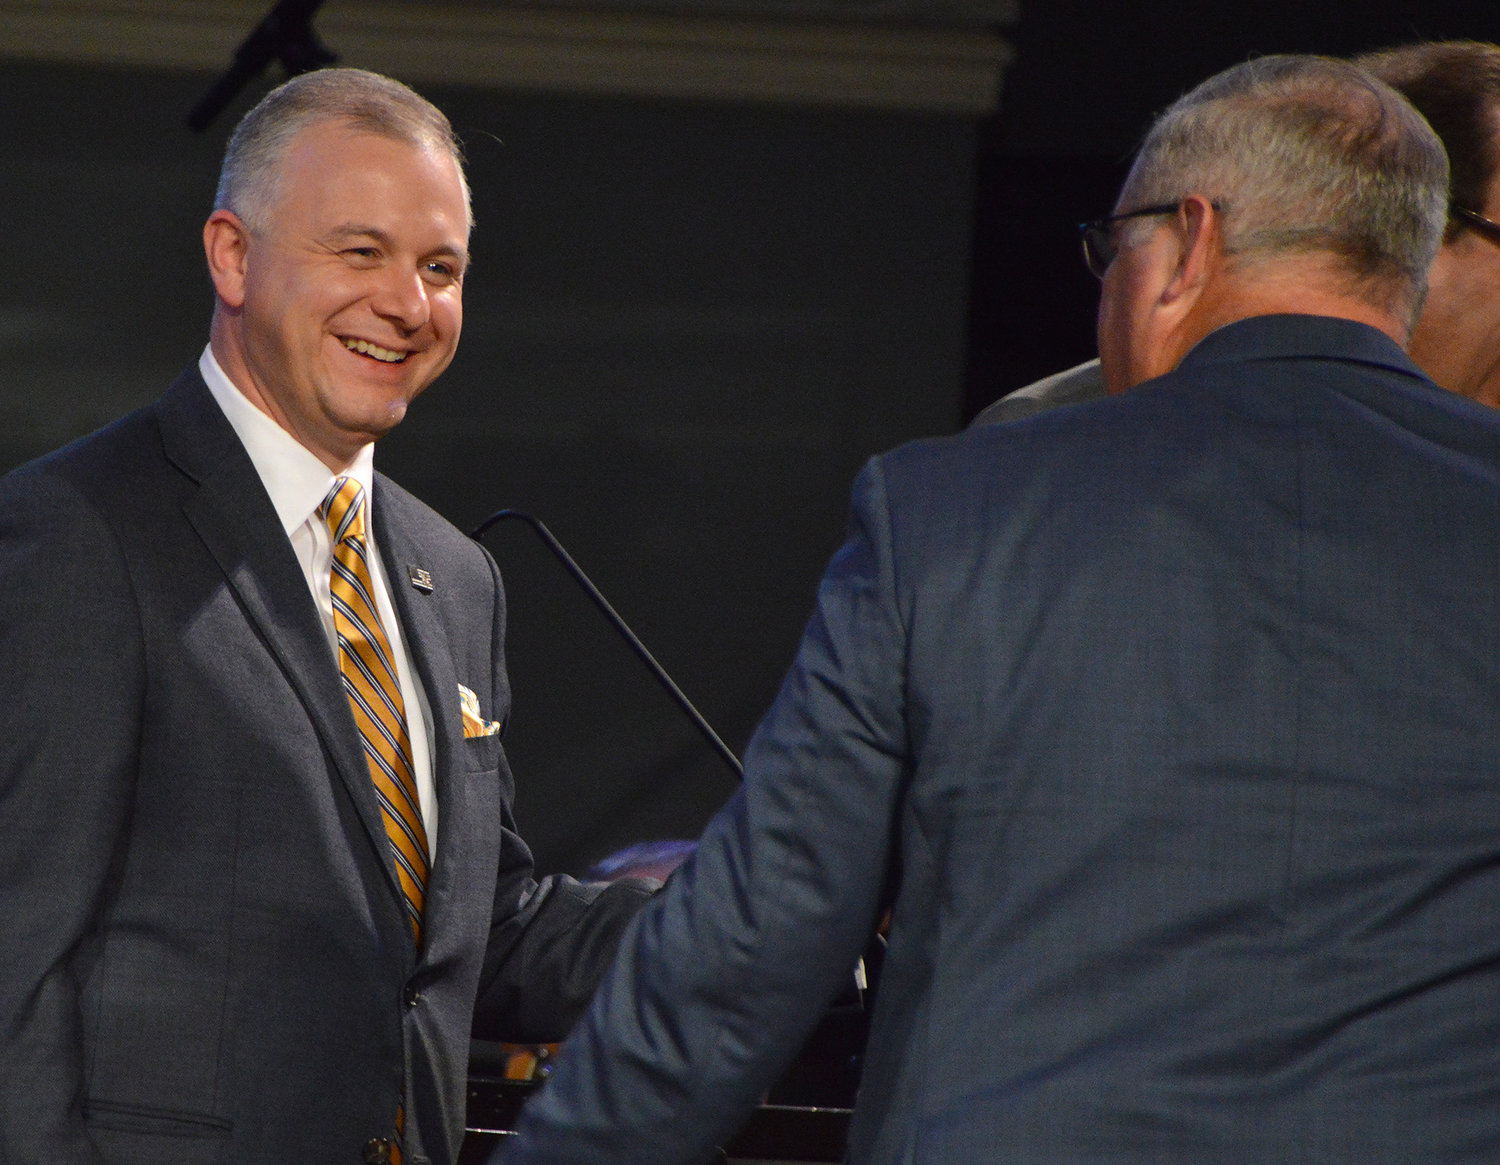 Newly elected president Josh Saefkow walks off the stage after his election as president was announced by outgoing president Kevin Williams, right, at the 200th annual meeting of the Georgia Baptist Convention in Augusta, Ga, Tuesday, Nov. 15, 2022. (Index/Henry Durand)